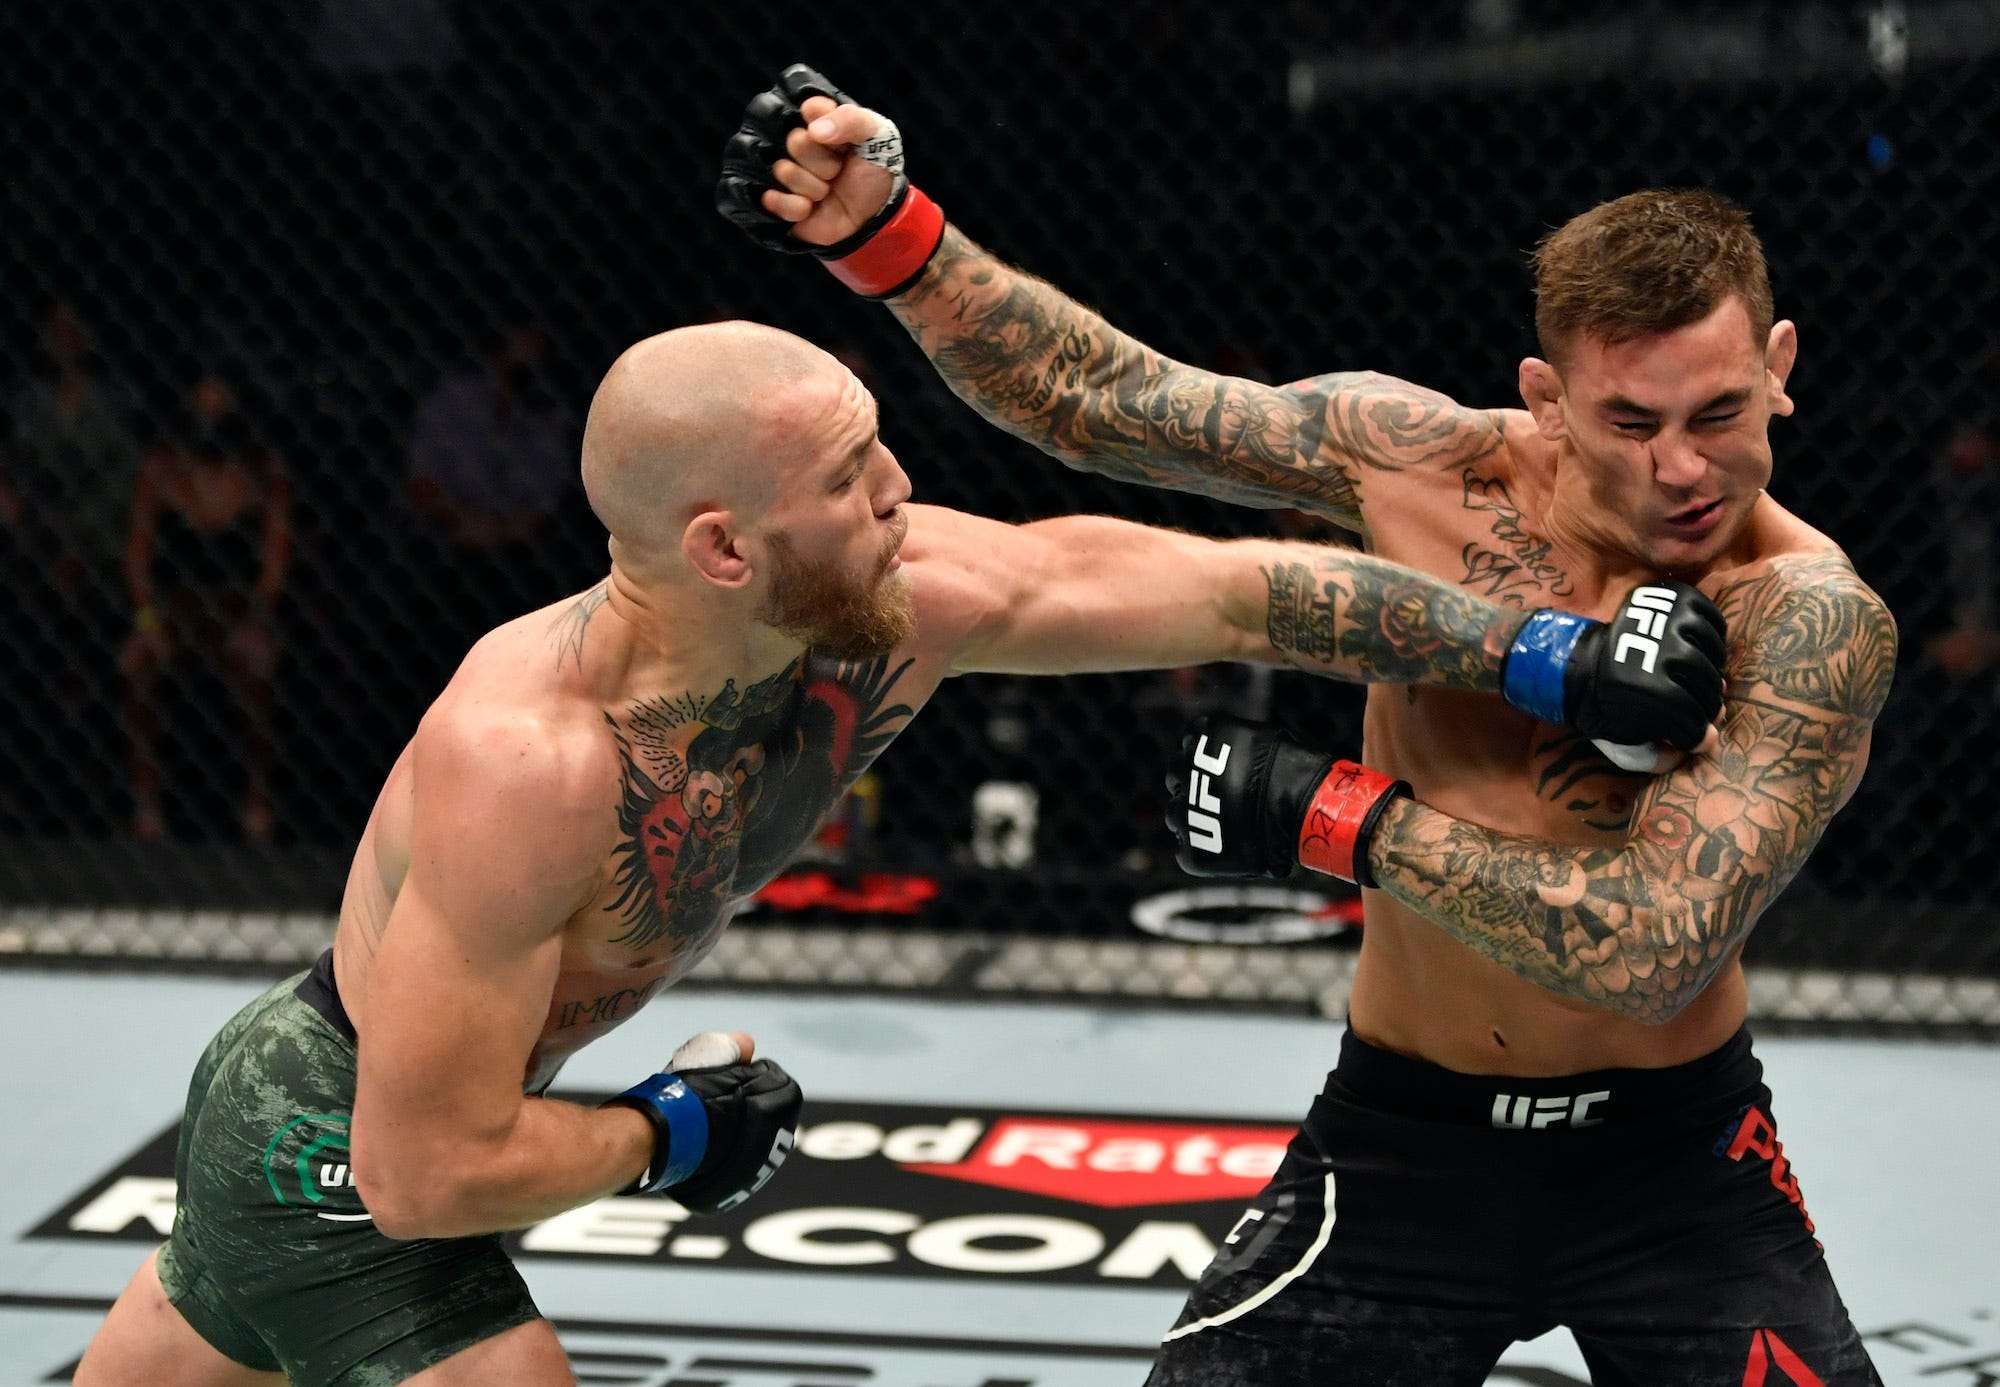 Conor McGregor and Dustin Poirier are amping up their 3fight rivalry